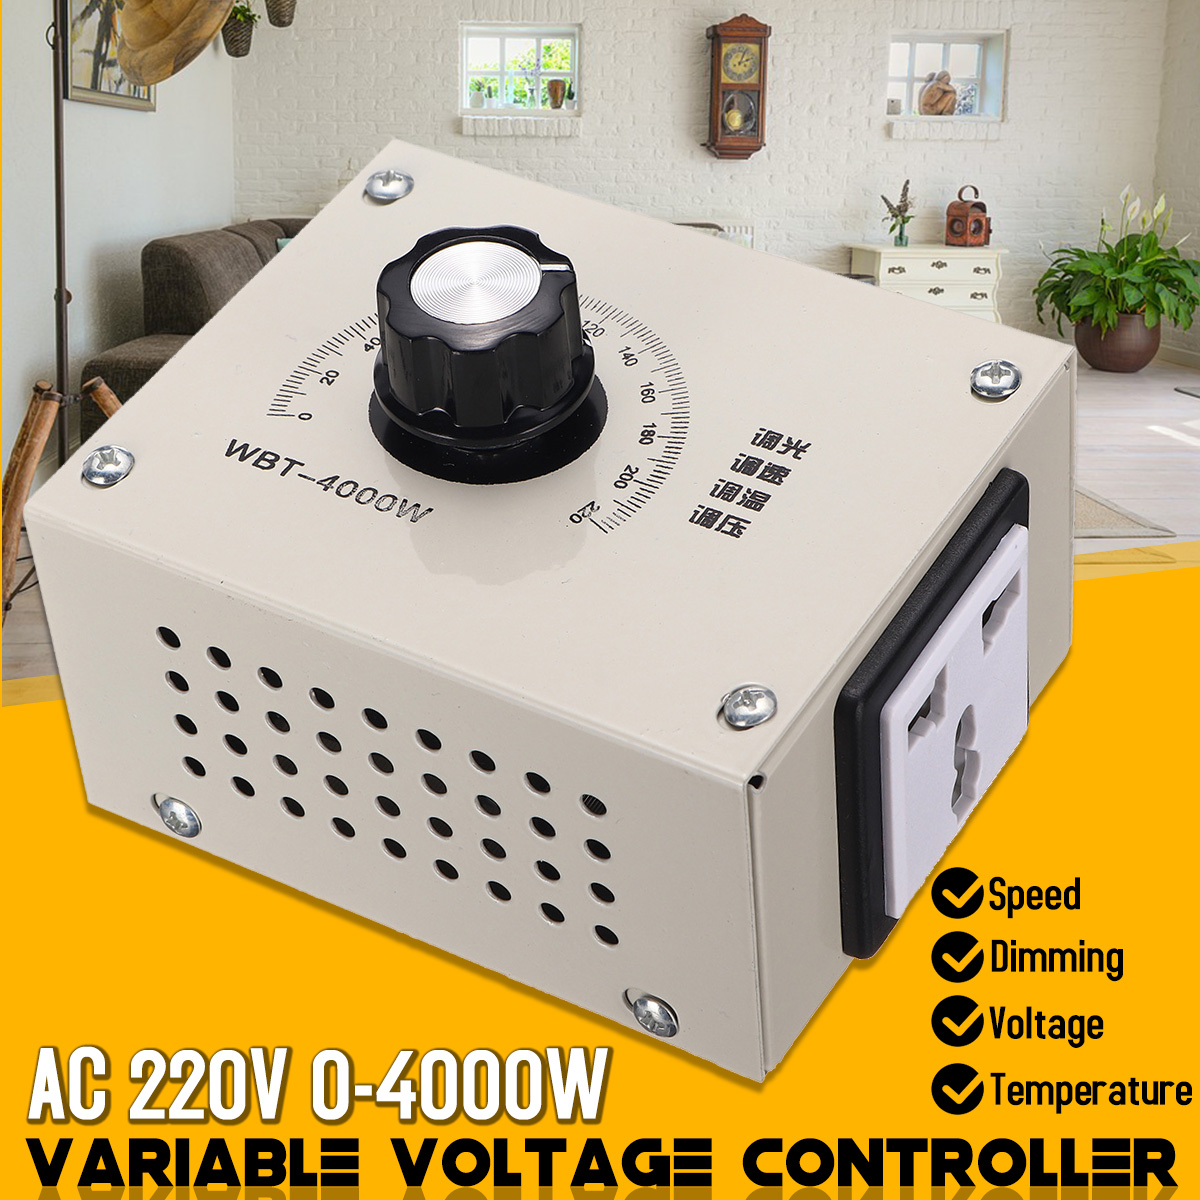 AC-0-220V-4000W-Adjustable-Voltage-Speed-Temperature-Dimmer-Controller-For-Thermostat-Light-Fan-Moto-1457283-2